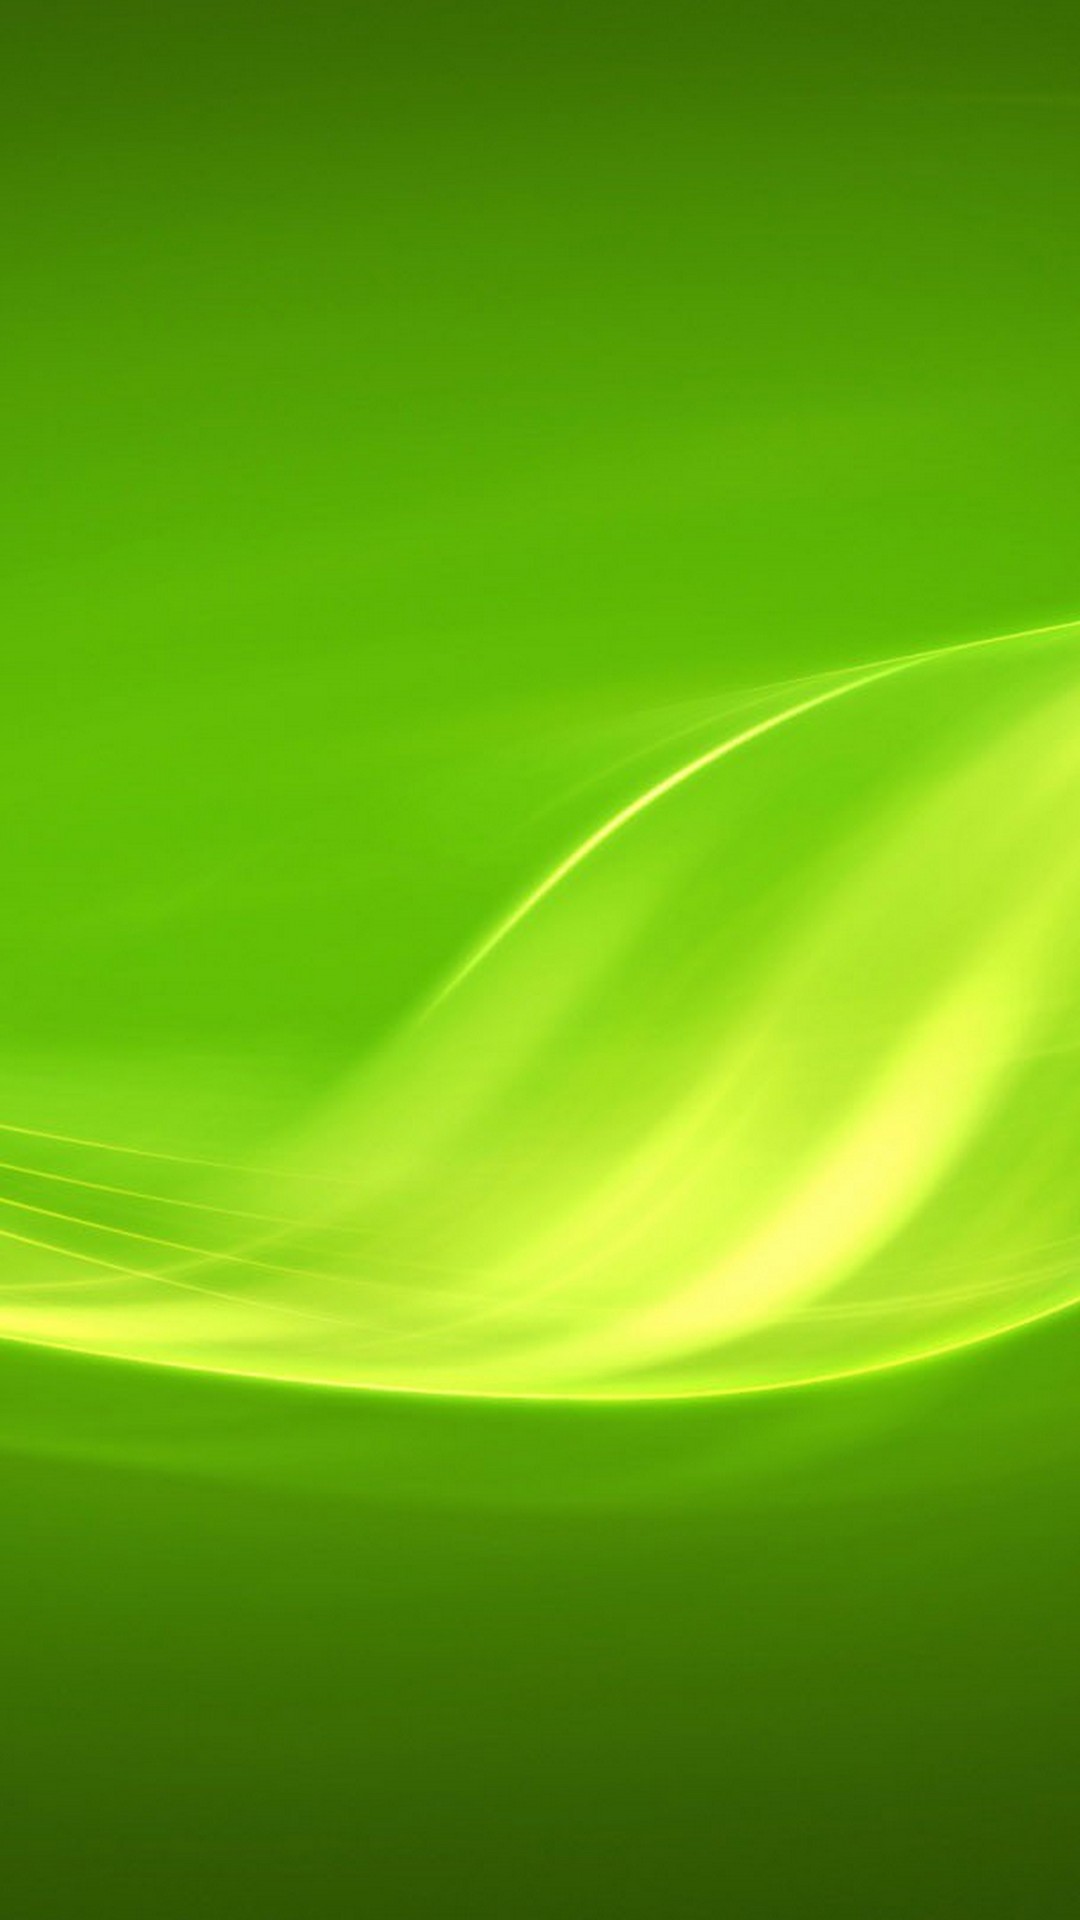 Lime Green HD Wallpapers For Android with resolution 1080X1920 pixel. You can make this wallpaper for your Android backgrounds, Tablet, Smartphones Screensavers and Mobile Phone Lock Screen